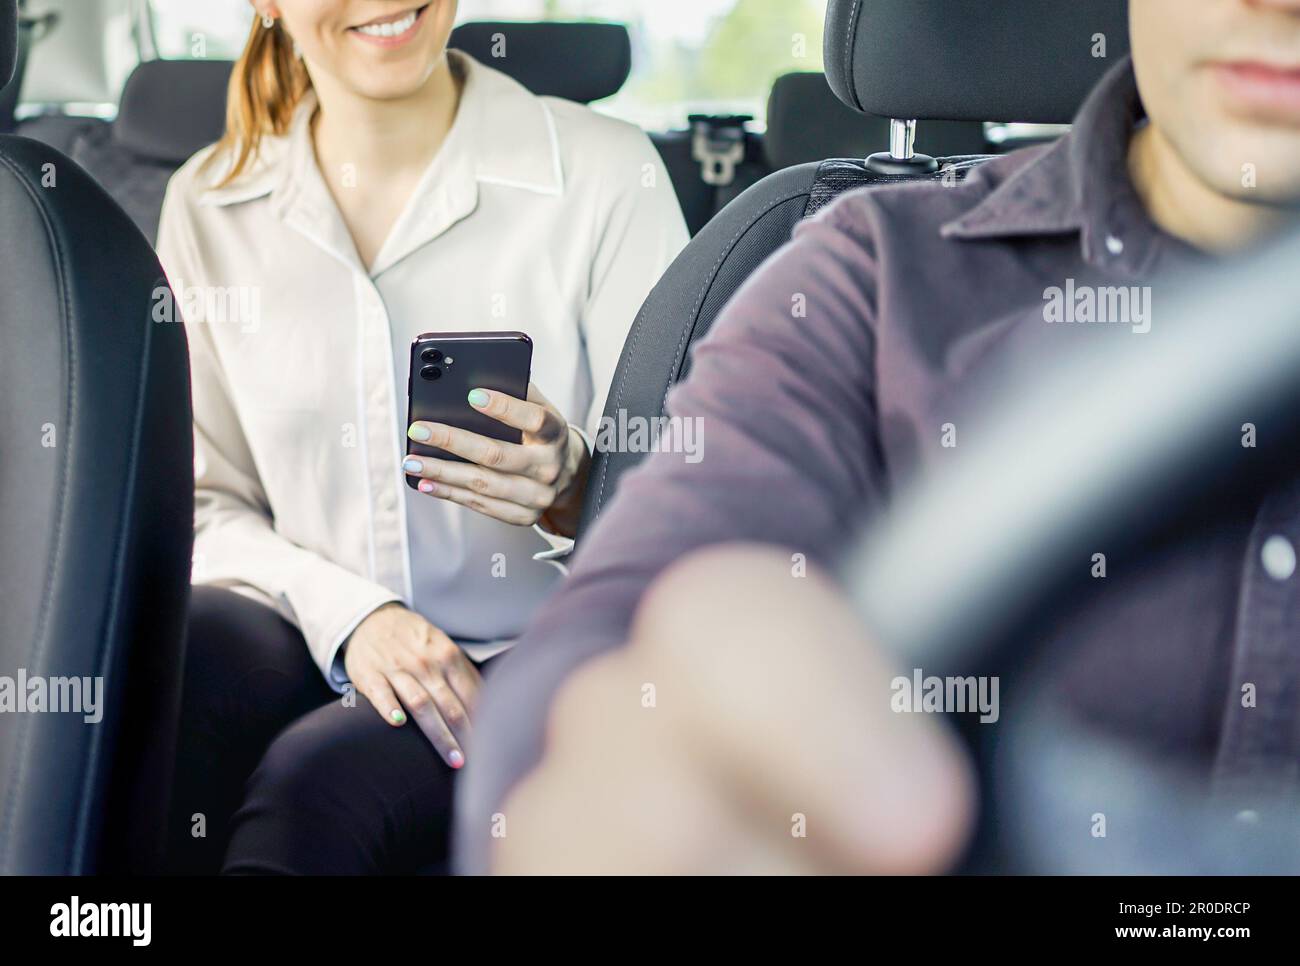 Taxi or rideshare car passenger using phone to pay for cab ride. Mobile payment, tip or review. Happy customer and driver. Woman holding cellphone. Stock Photo